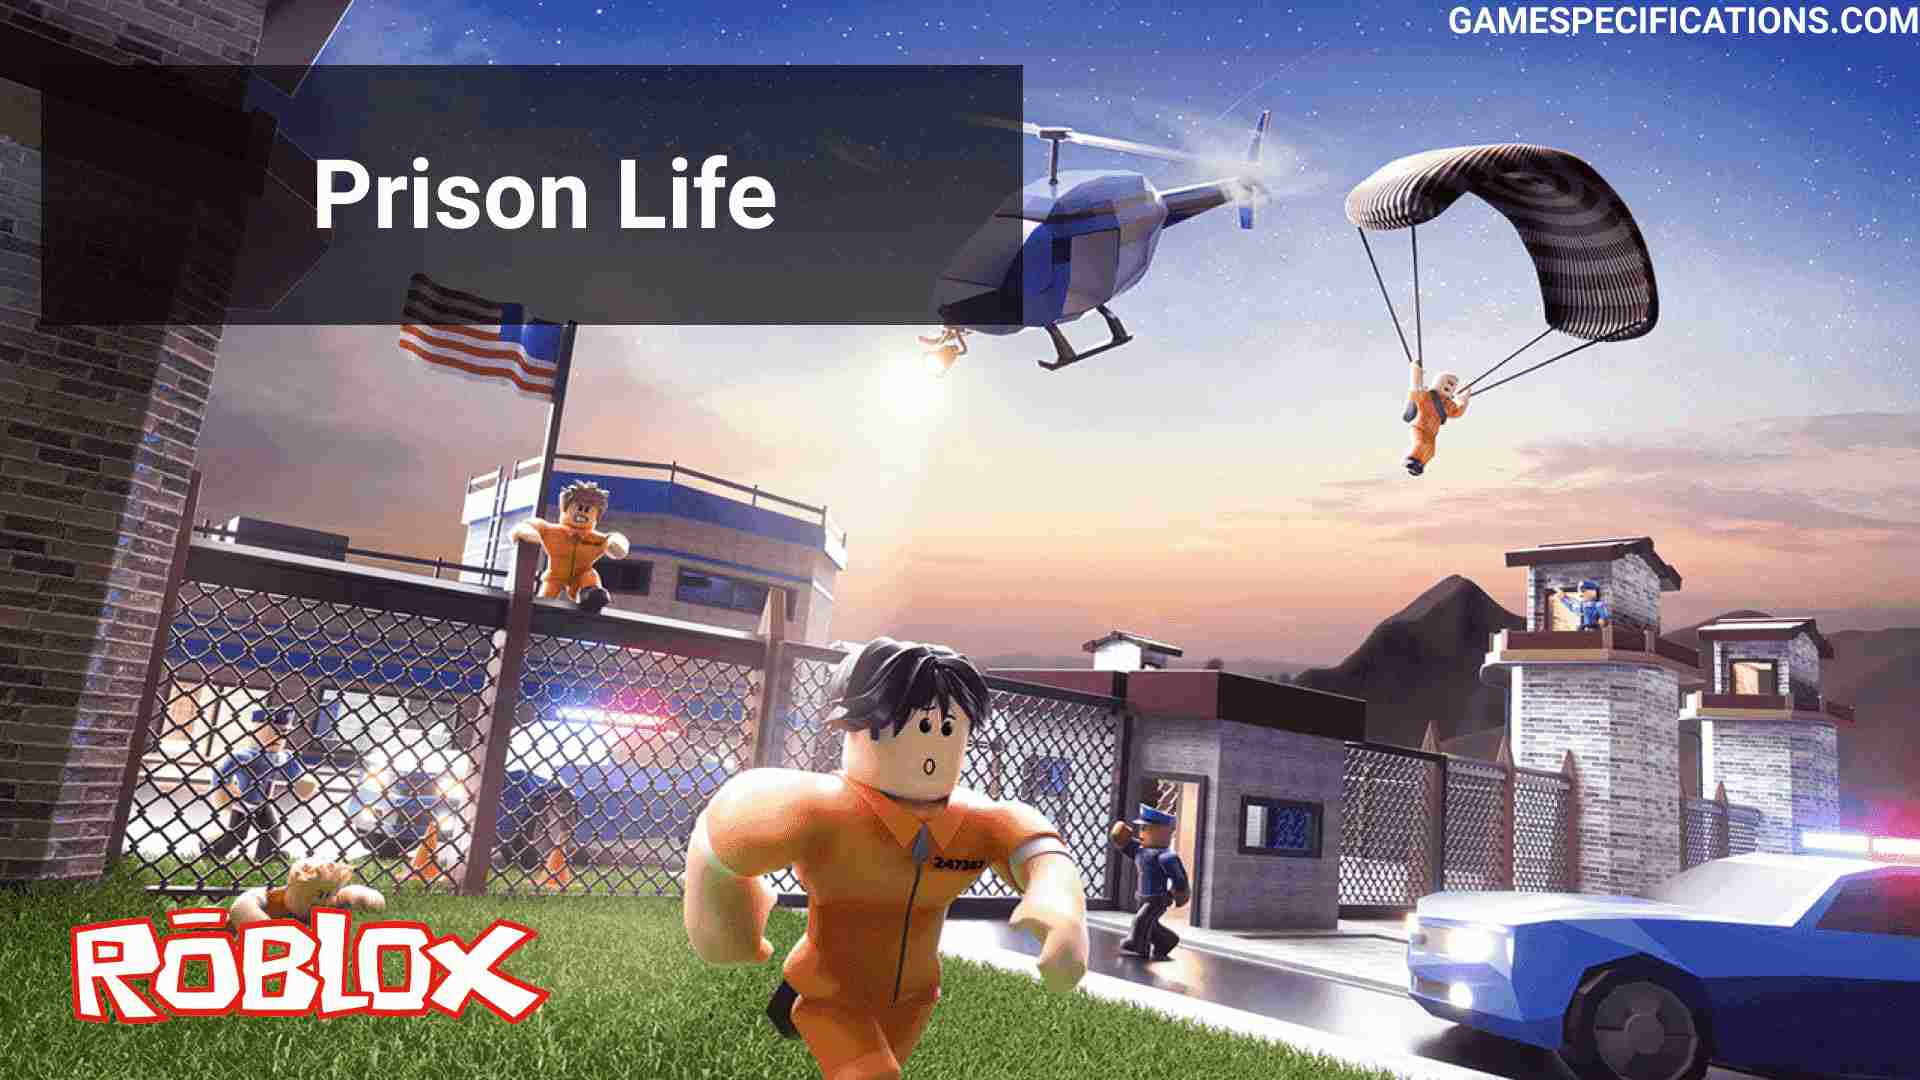 Roblox Prison Life A Complete Guide To Escape Prison 2021 Game Specifications - life roblox game